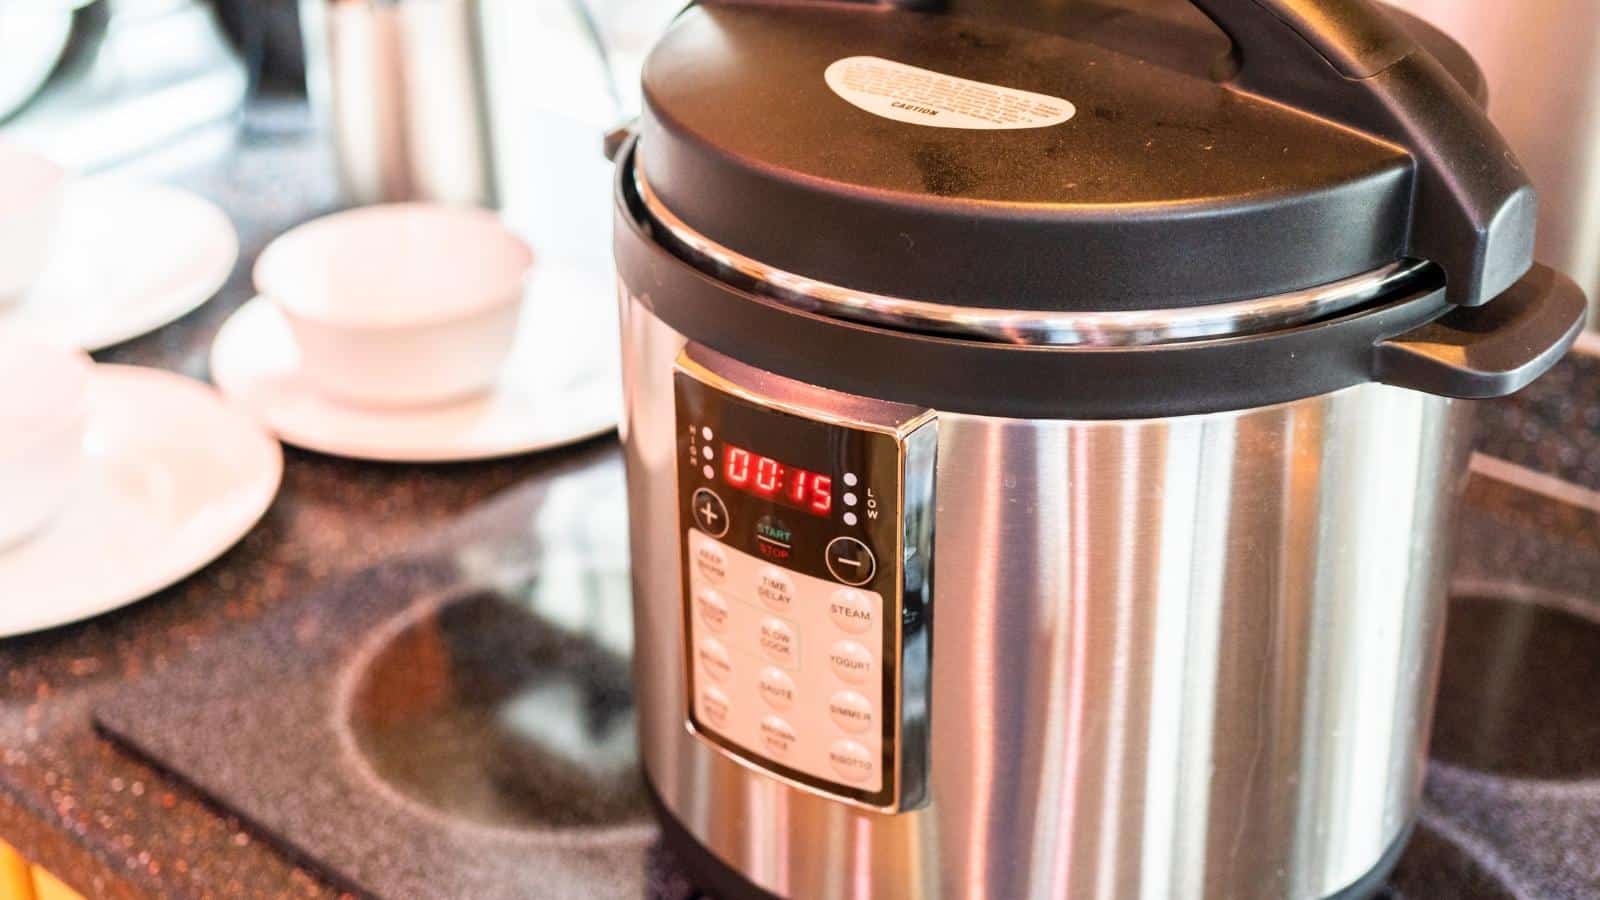 When To Use Low, Medium And High Pressure On Pressure Cooker?